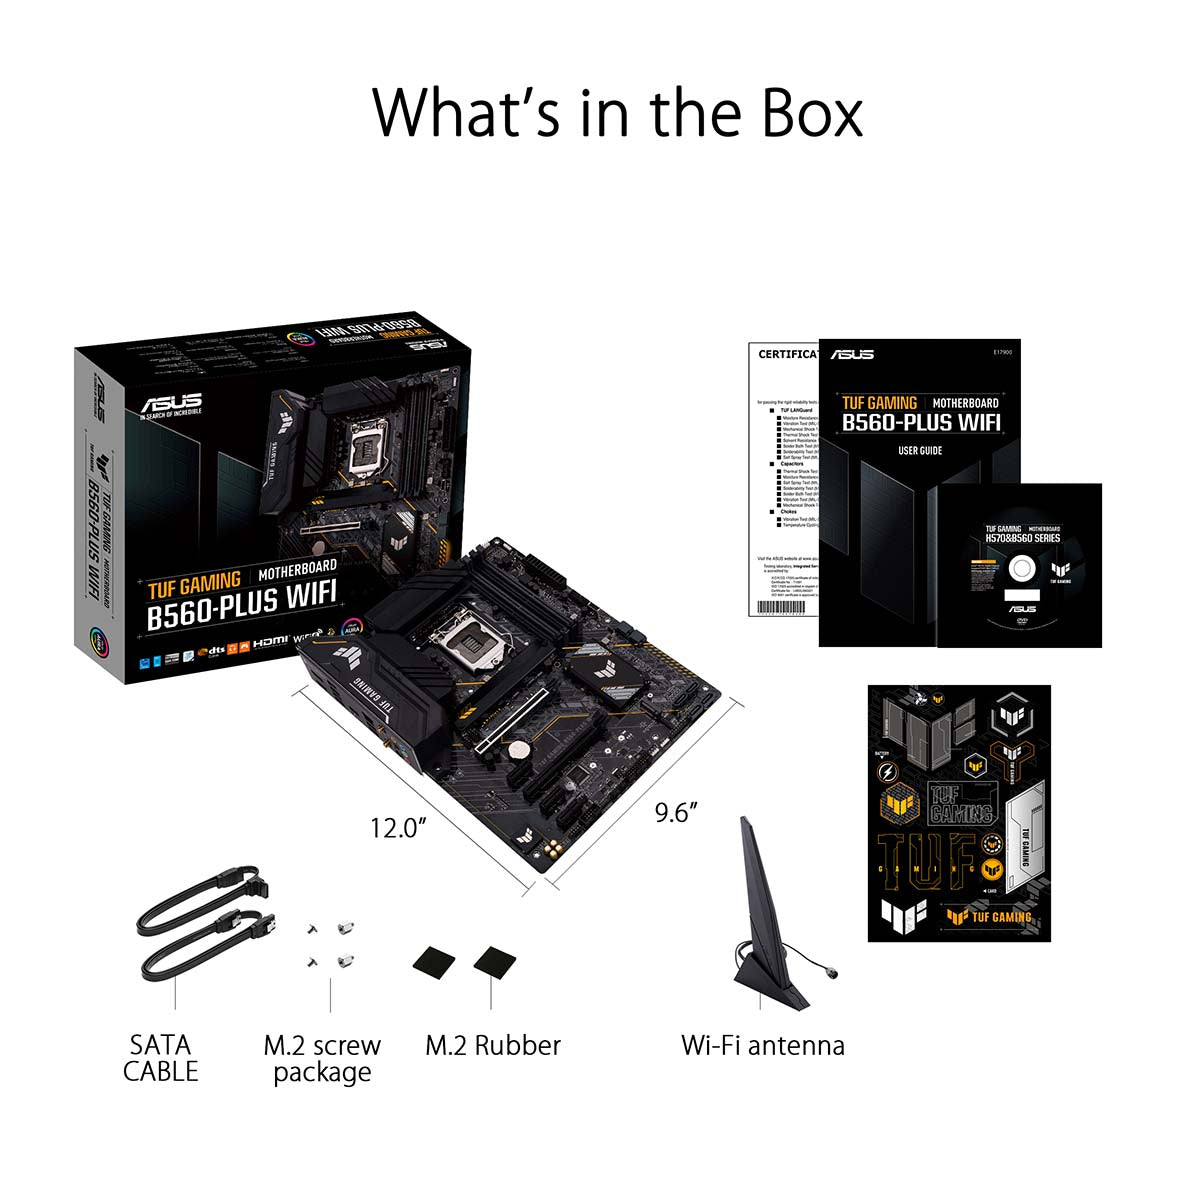 [RePacked] ASUS TUF Gaming B560-Plus WiFi LGA 1200 ATX Motherboard with Thunderbolt 4 and AI Noise Cancellation